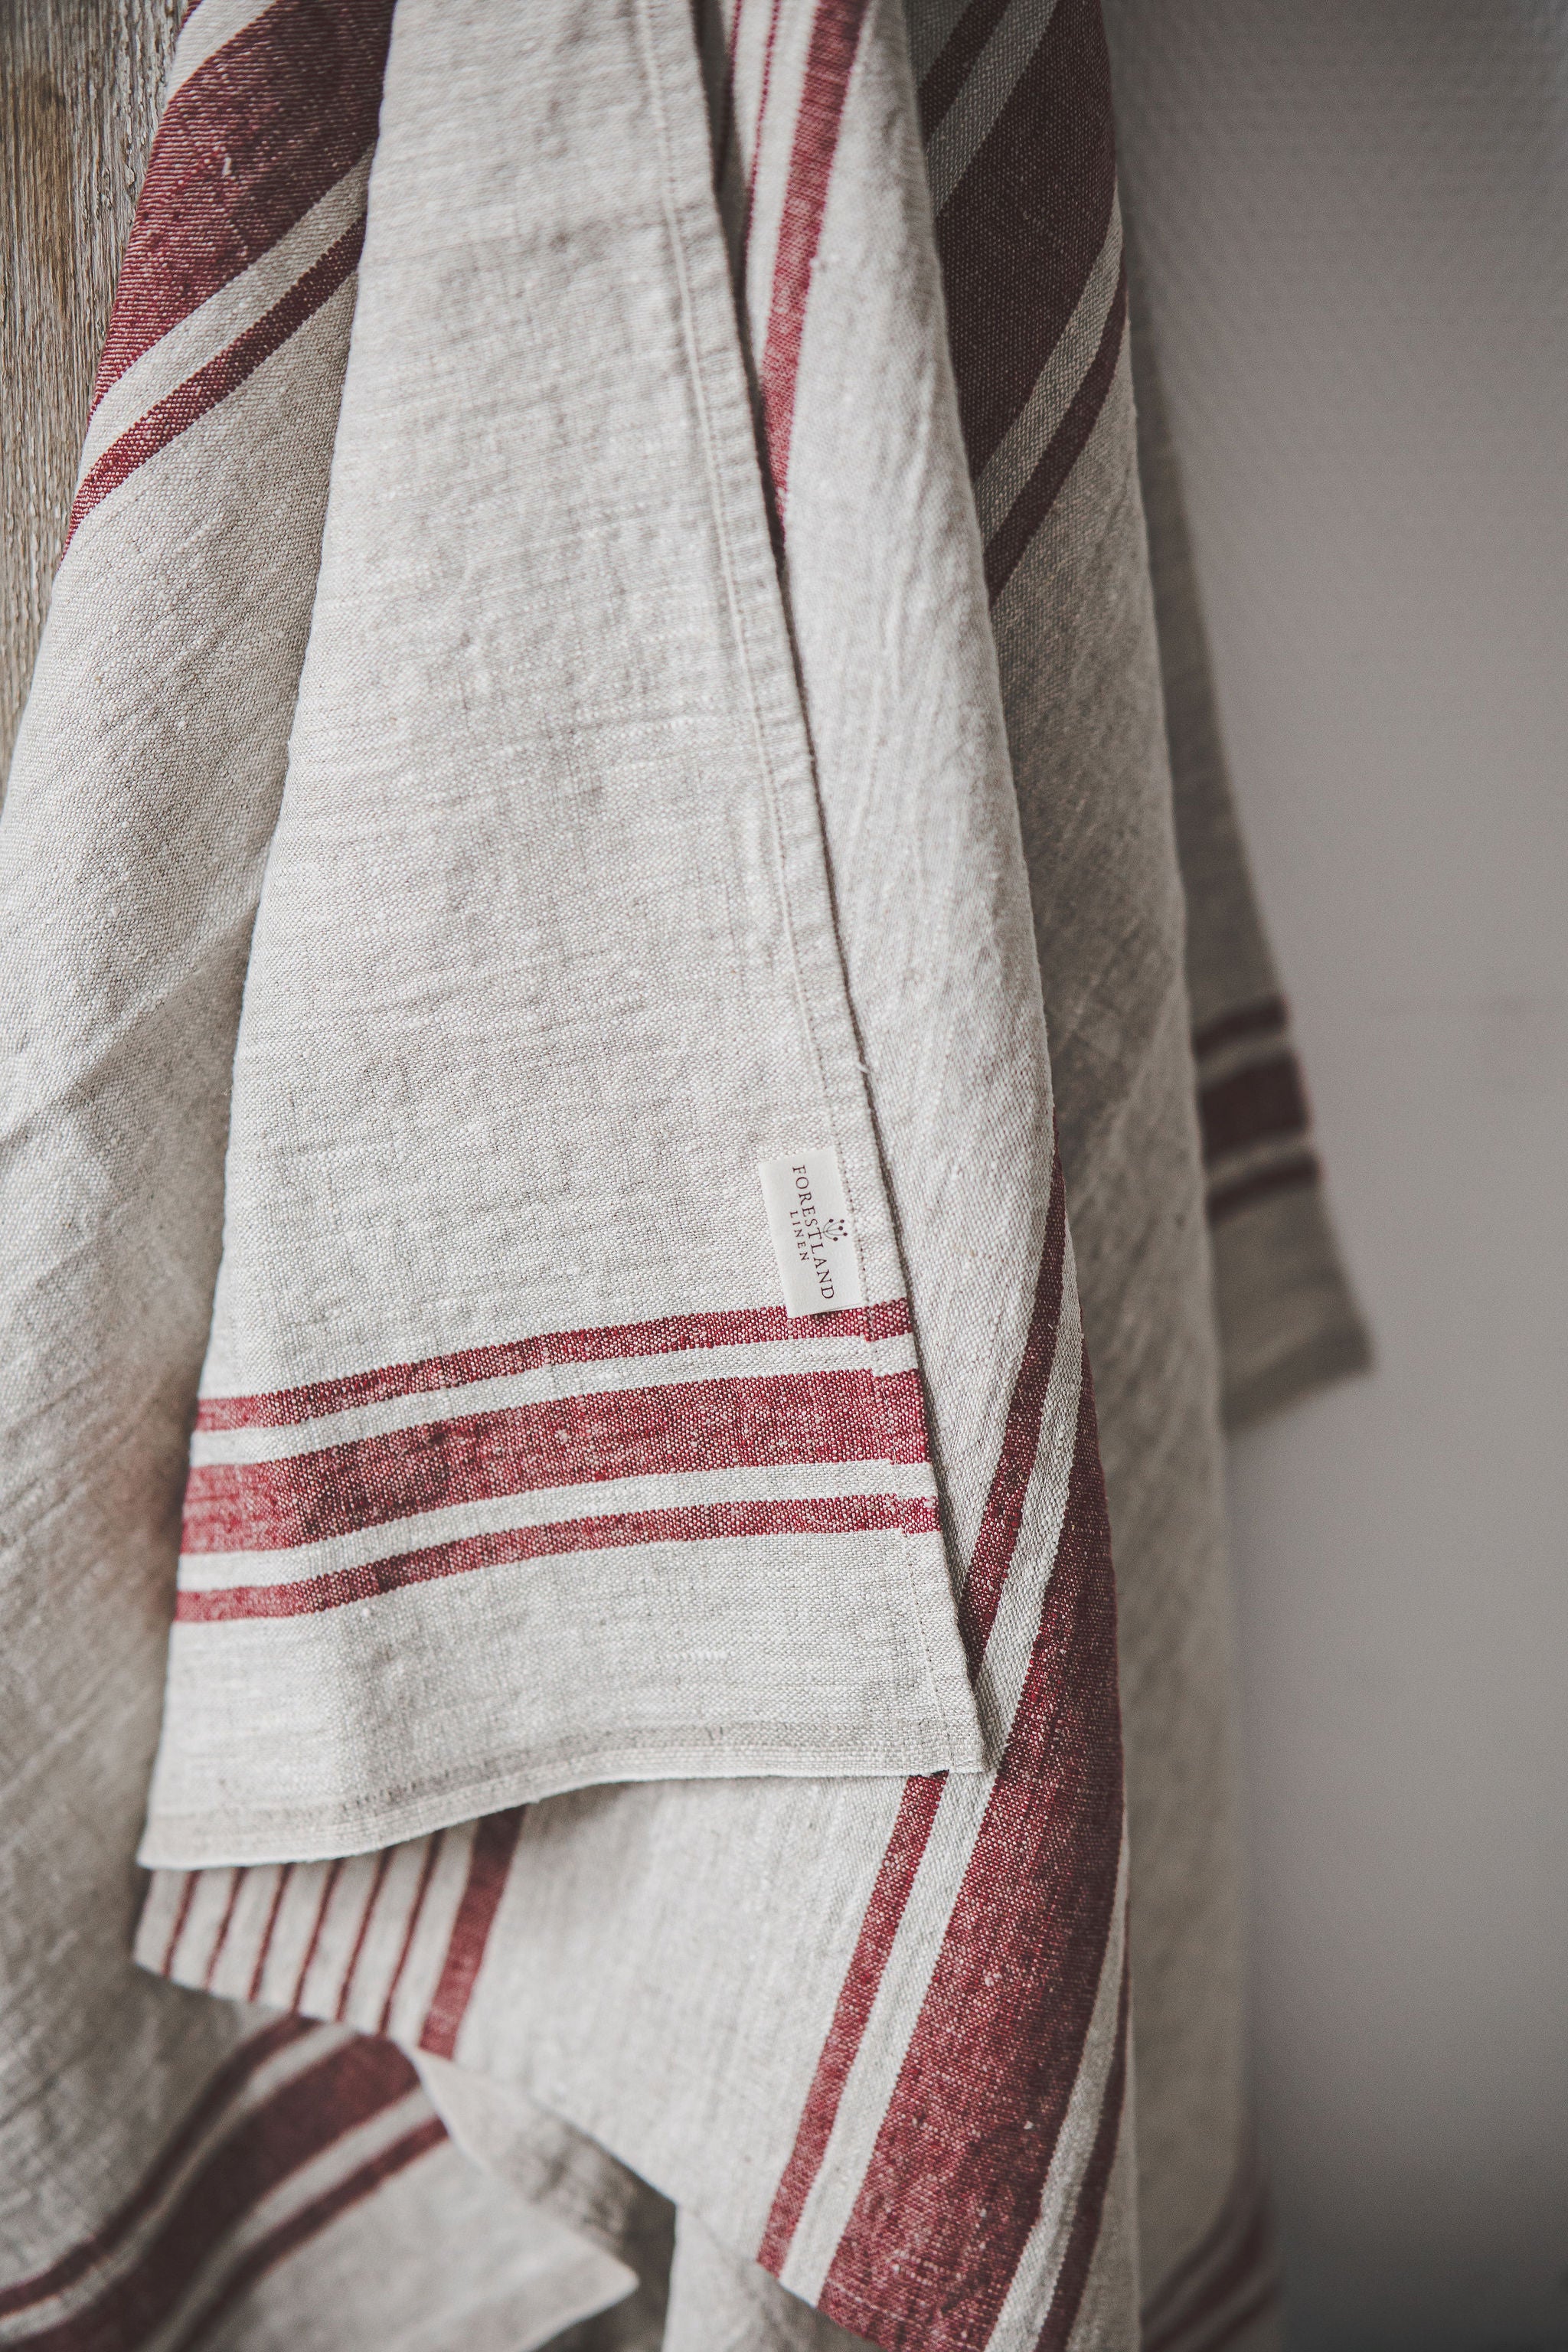 Linen bath towels with cherry red stripes